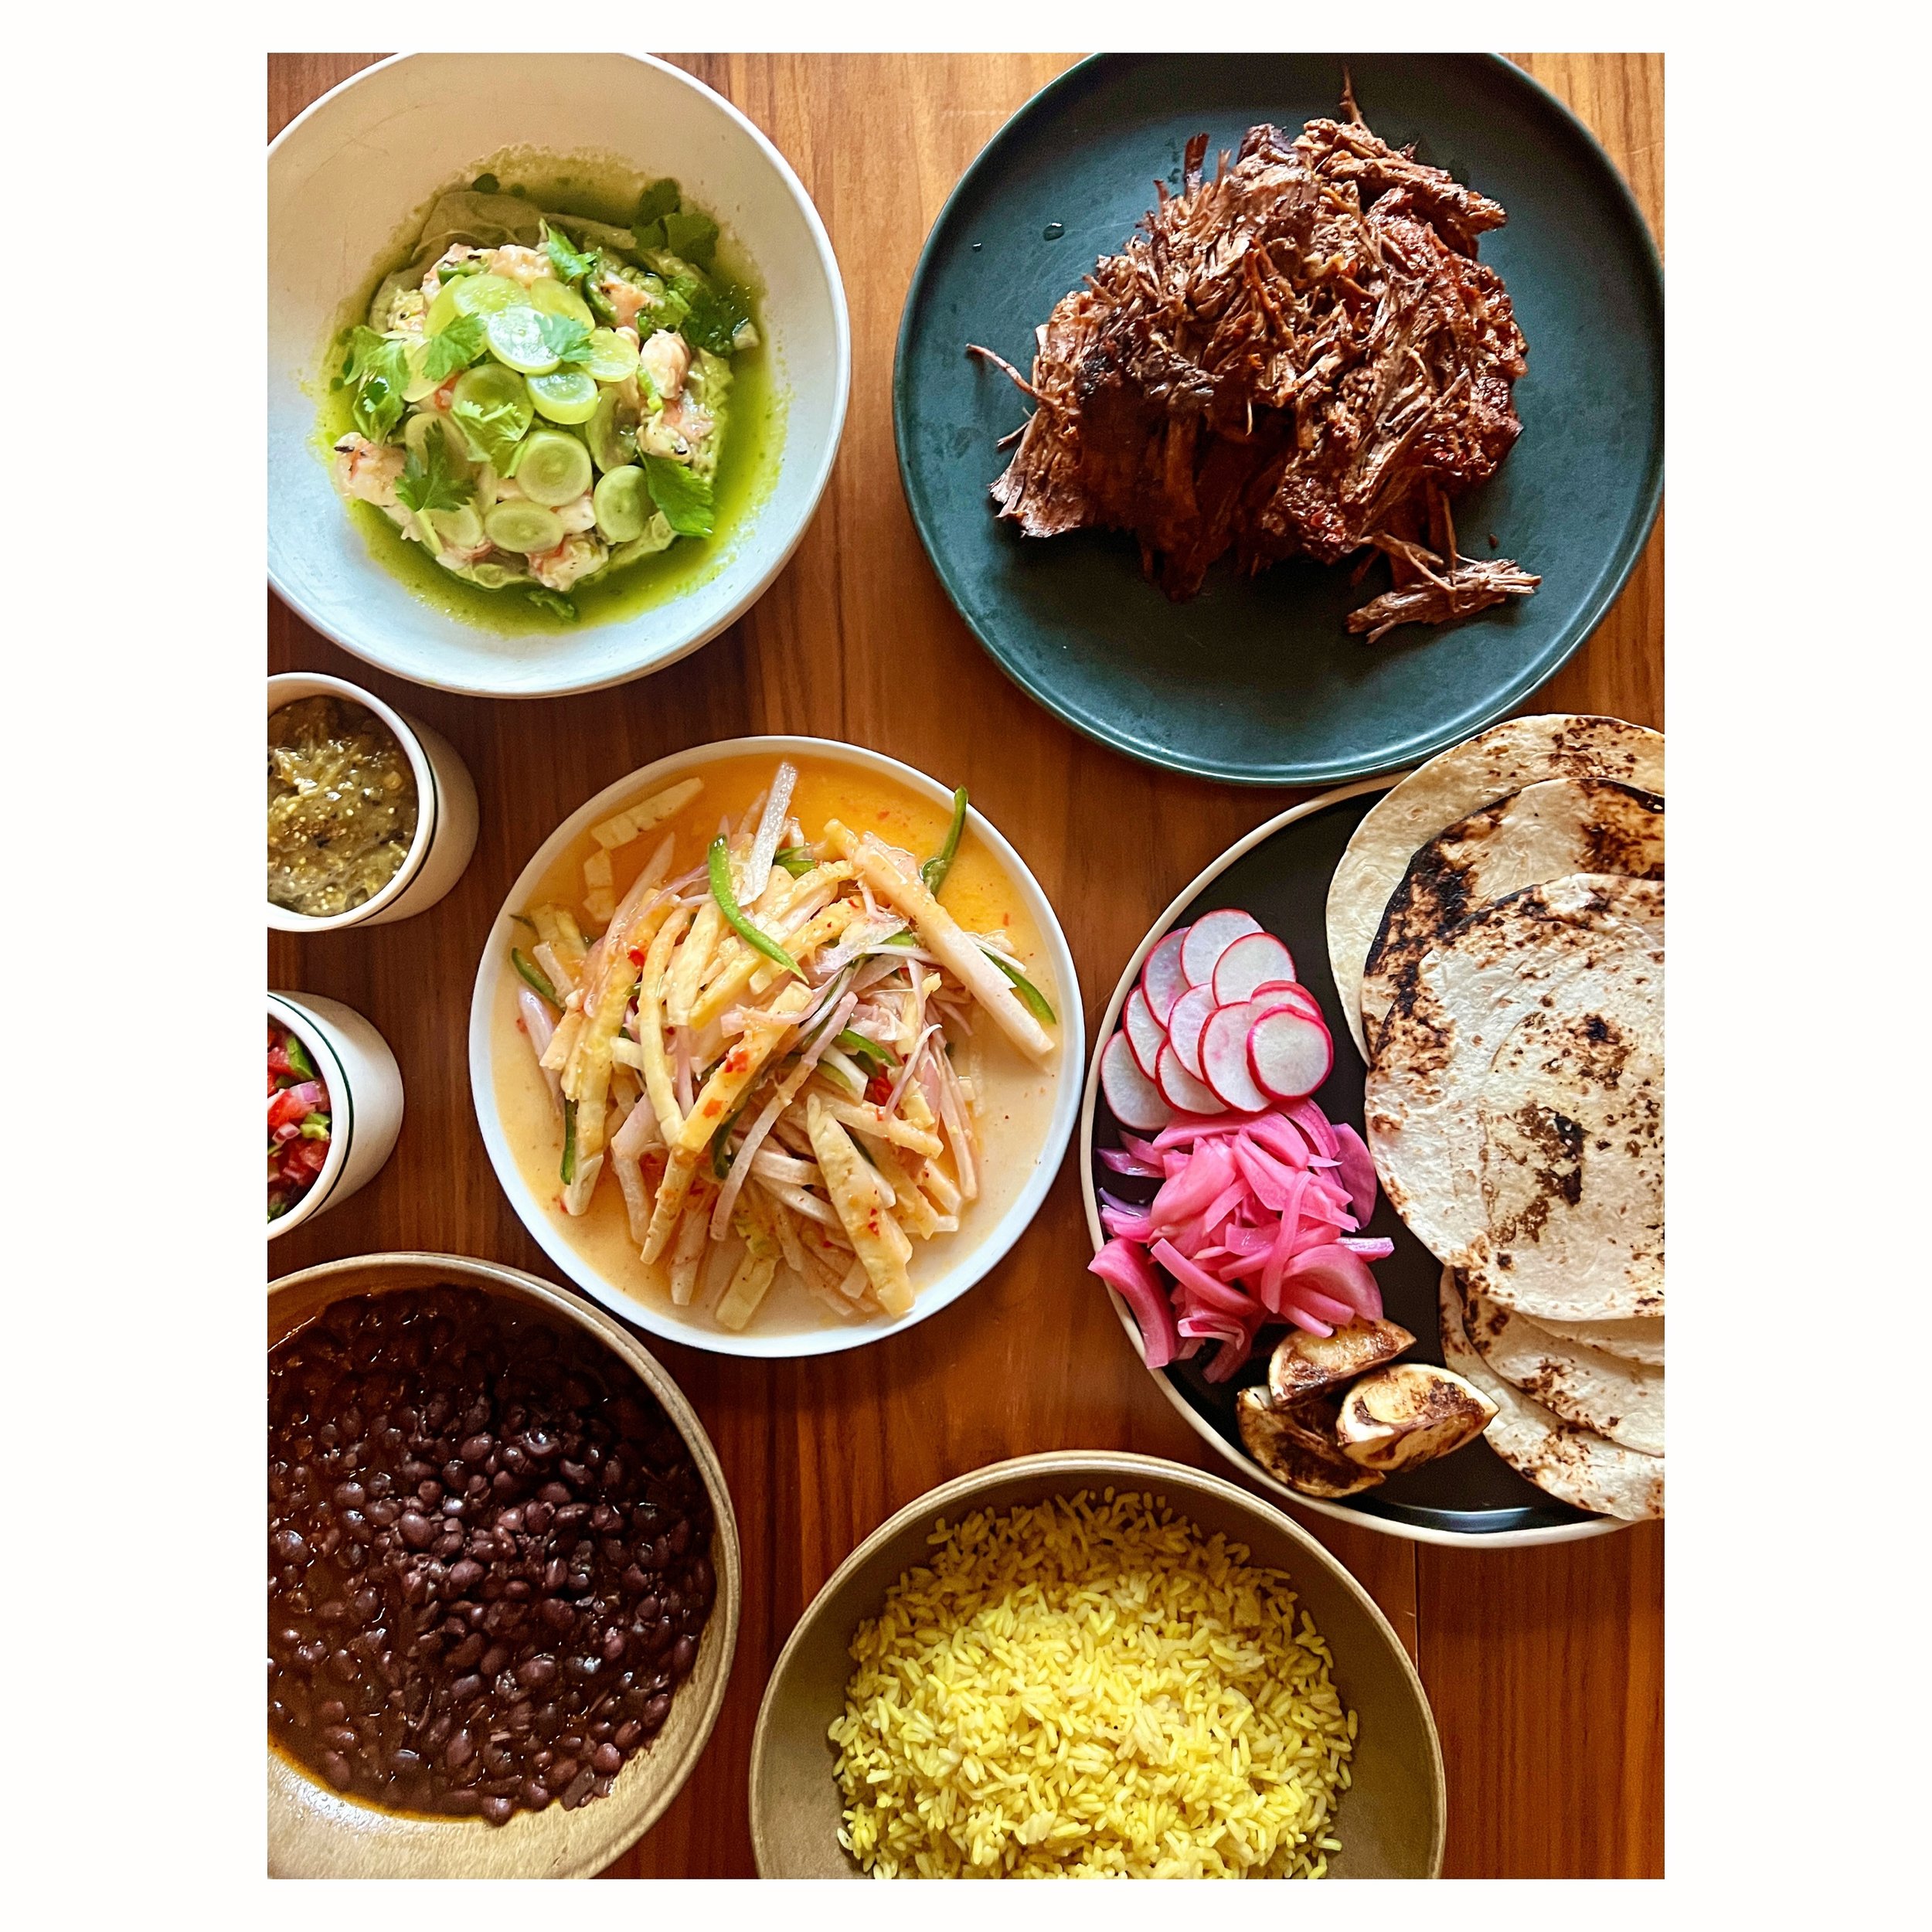 📣 This week at Kabinett&hellip;. With Mother&rsquo;s Day behind us, we&rsquo;re back to regular 𝗦𝘂𝗻𝗱𝗮𝘆 𝗦𝘂𝗽𝗽𝗲𝗿 programming. This month we&rsquo;re heading to Mexico with a lively shrimp ceviche, hearty beef birria, a bracing jicama and pi